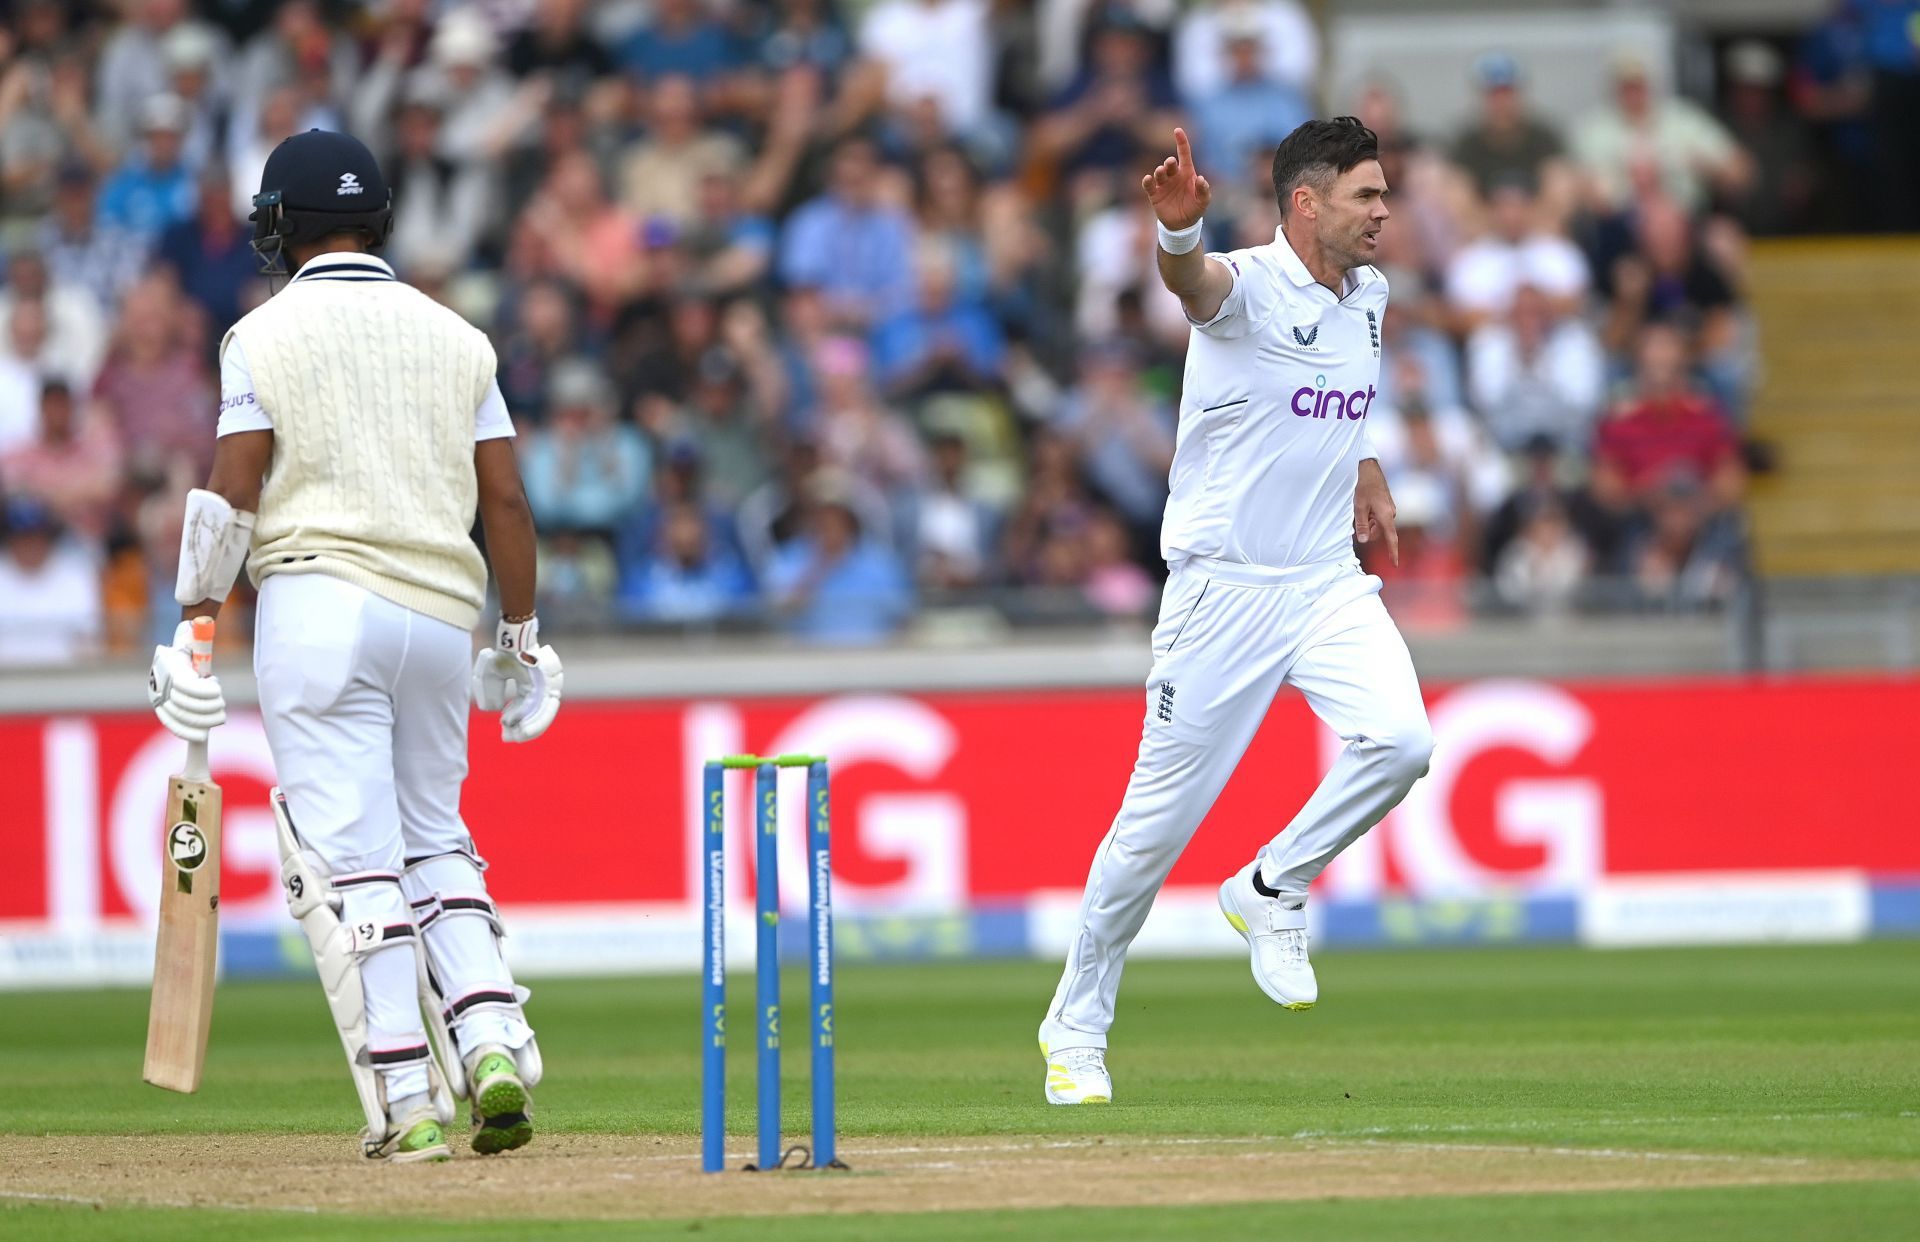 James Anderson (R) celebrates after dismissing Cheteshwar Pujara during the 5th India-England Test